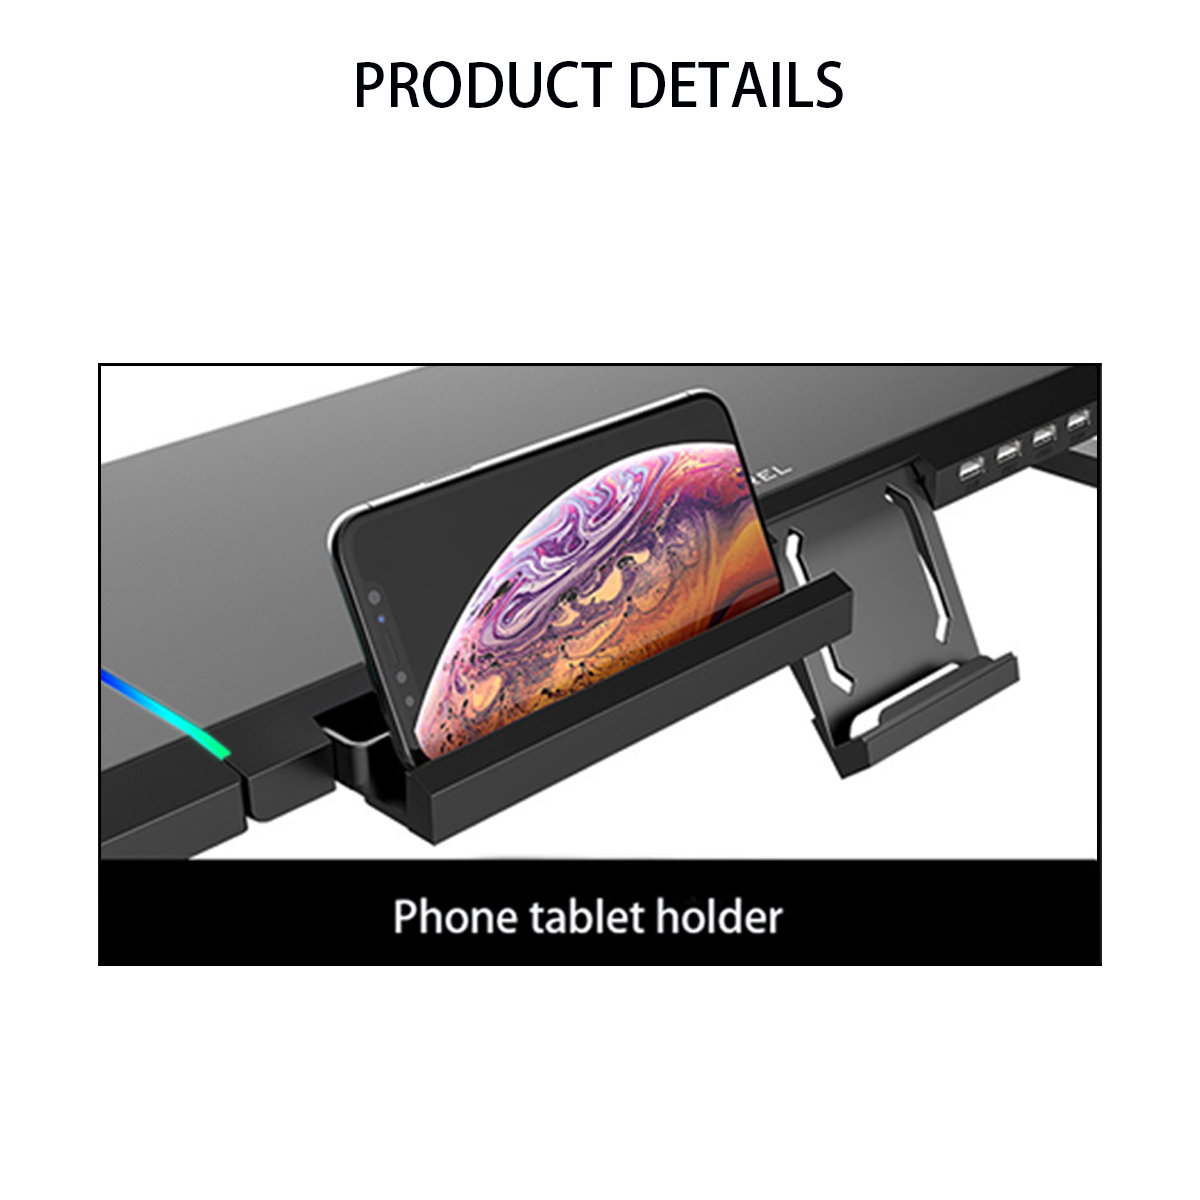 ICECOOREL-T1-RGB-Lighting-for-iMac-Monitor-Riser-Stand-with-4-USB-30-Port-Phone-Holder-Storage-Drawe-1885605-8